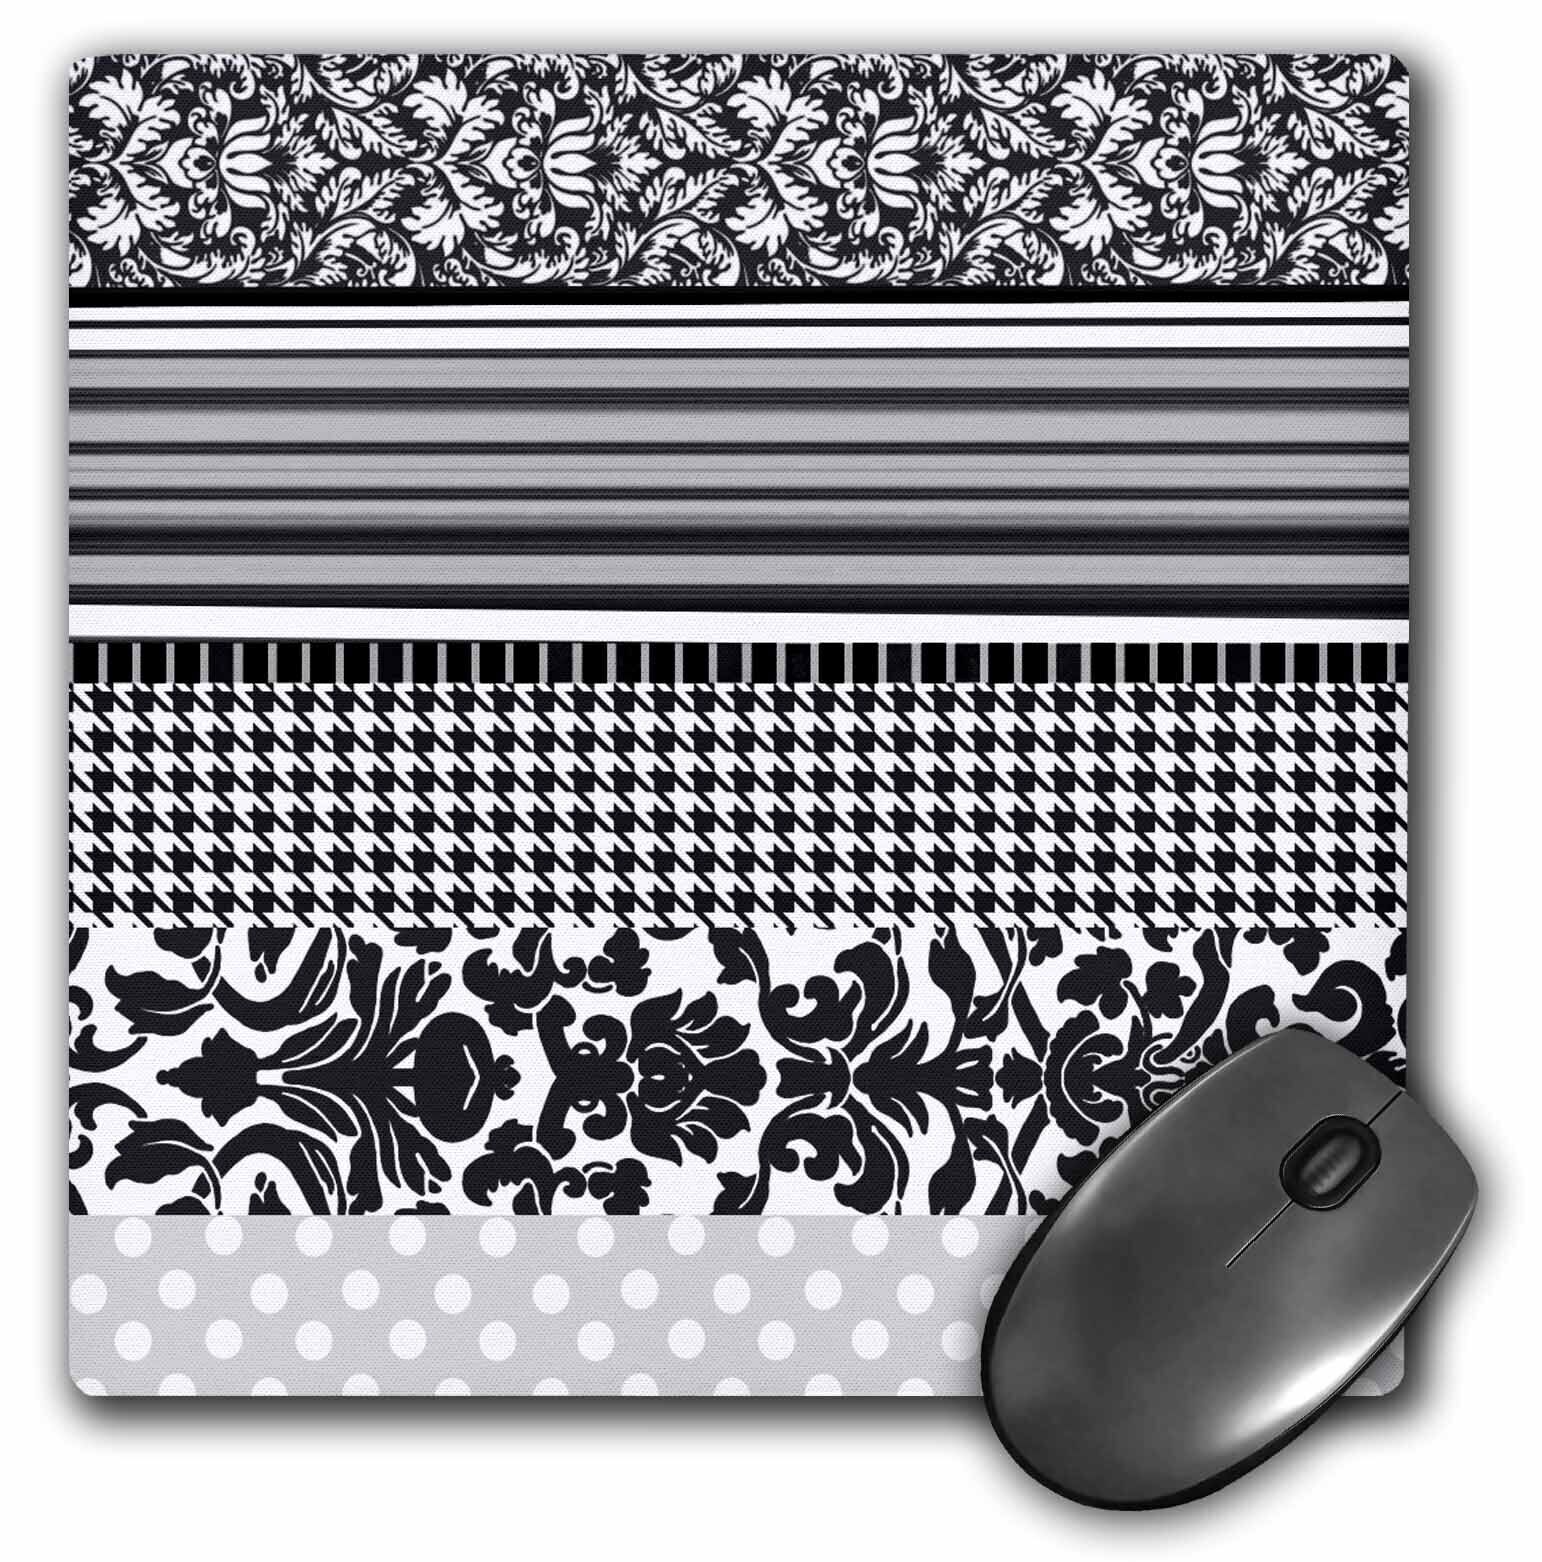 3dRose Black and white stylish pattern with damask houndstooth stripes and polka